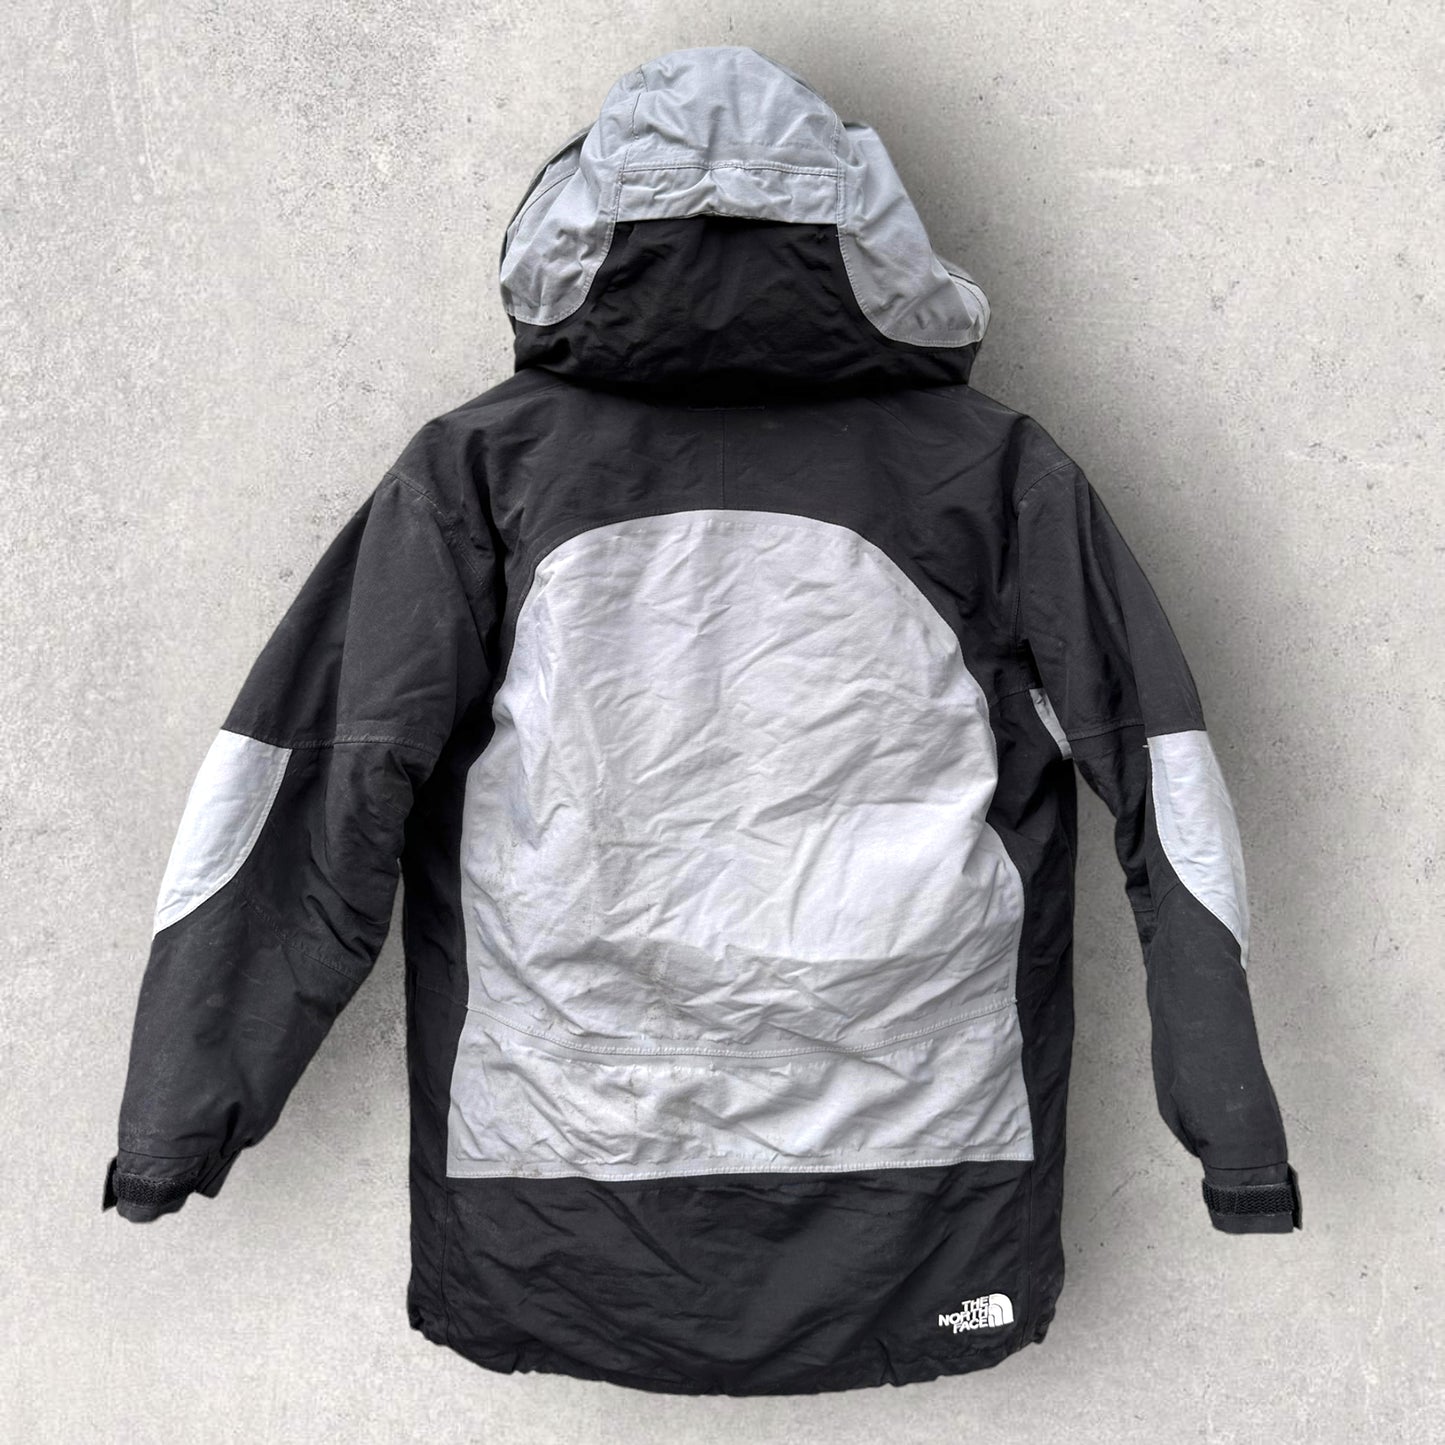 NORTH FACE KIDS HOODED BIG SHELL JACKET